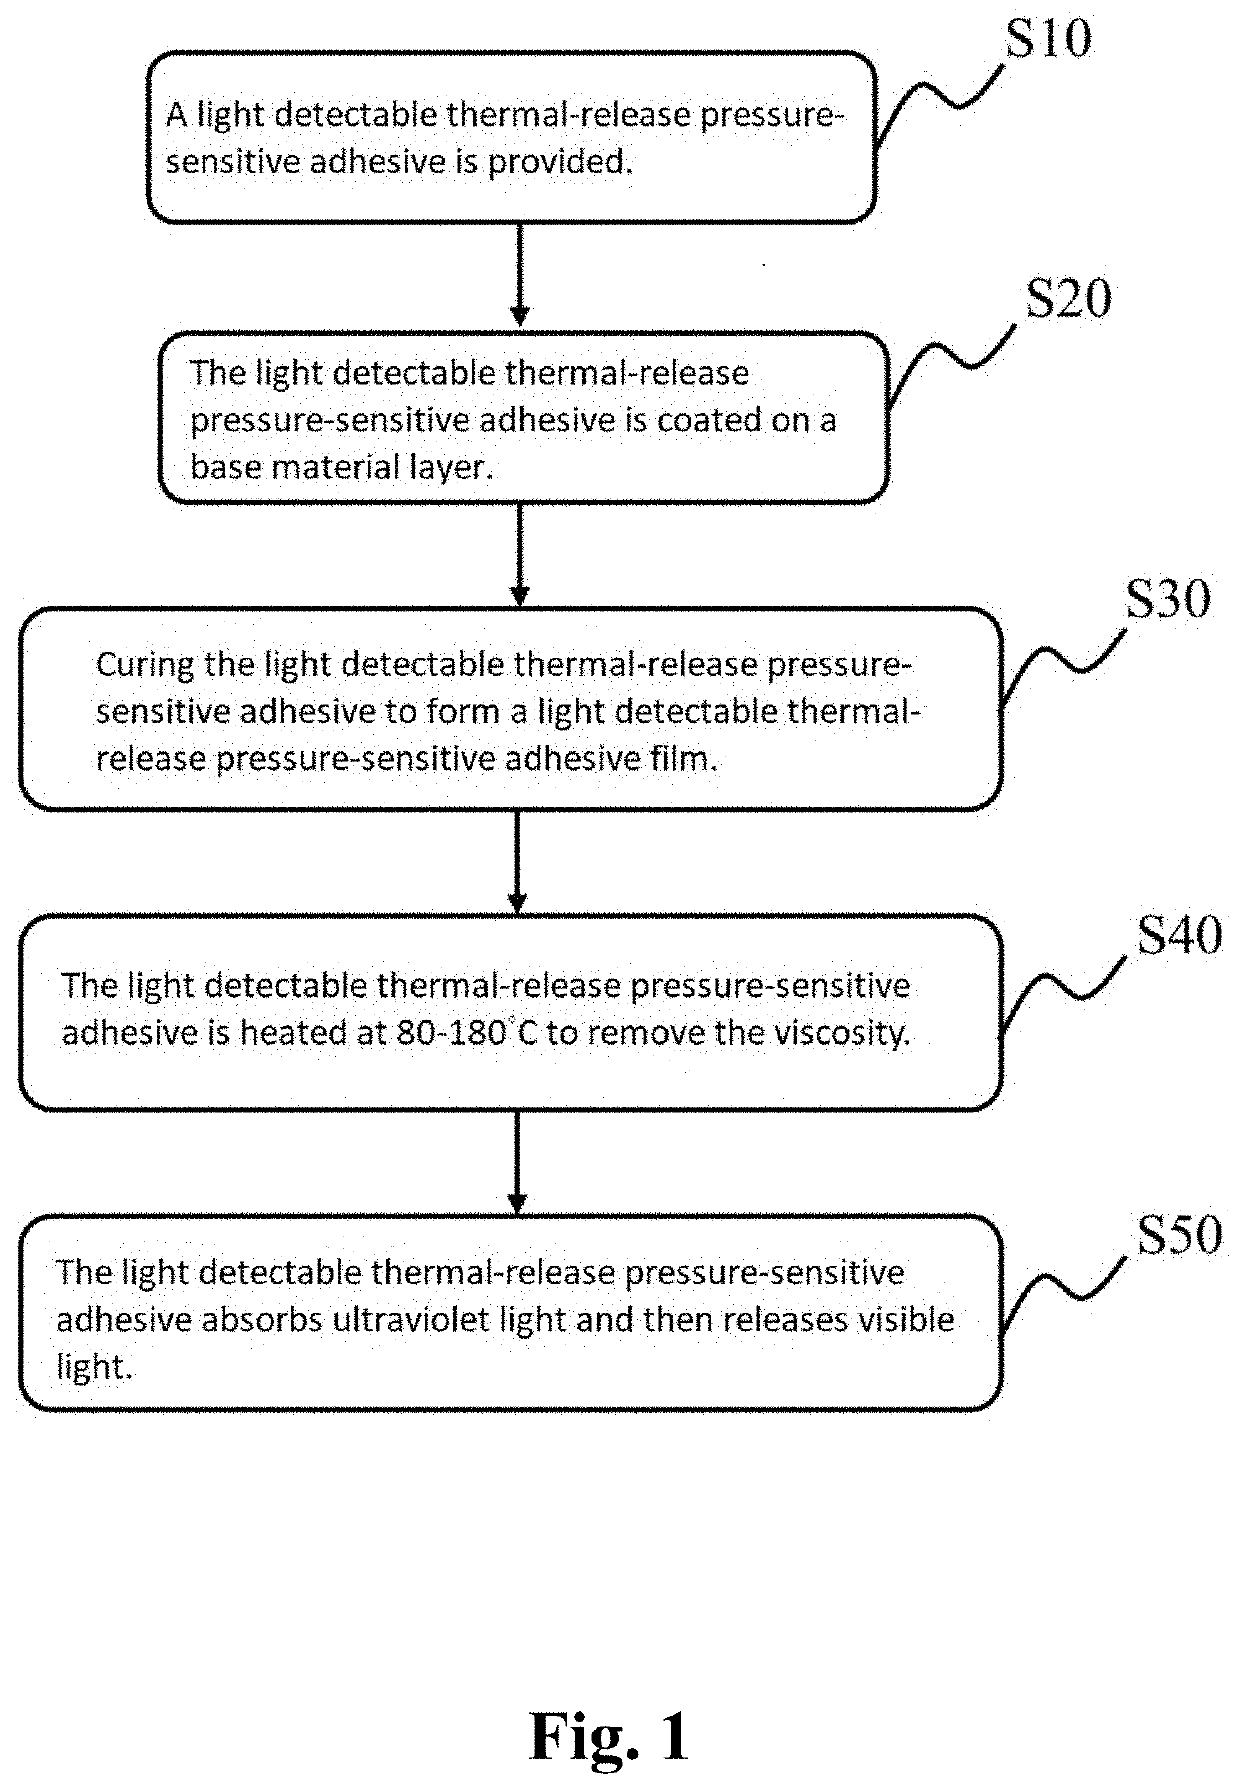 Light detectable thermal-release pressure-sensitive adhesive and application thereof